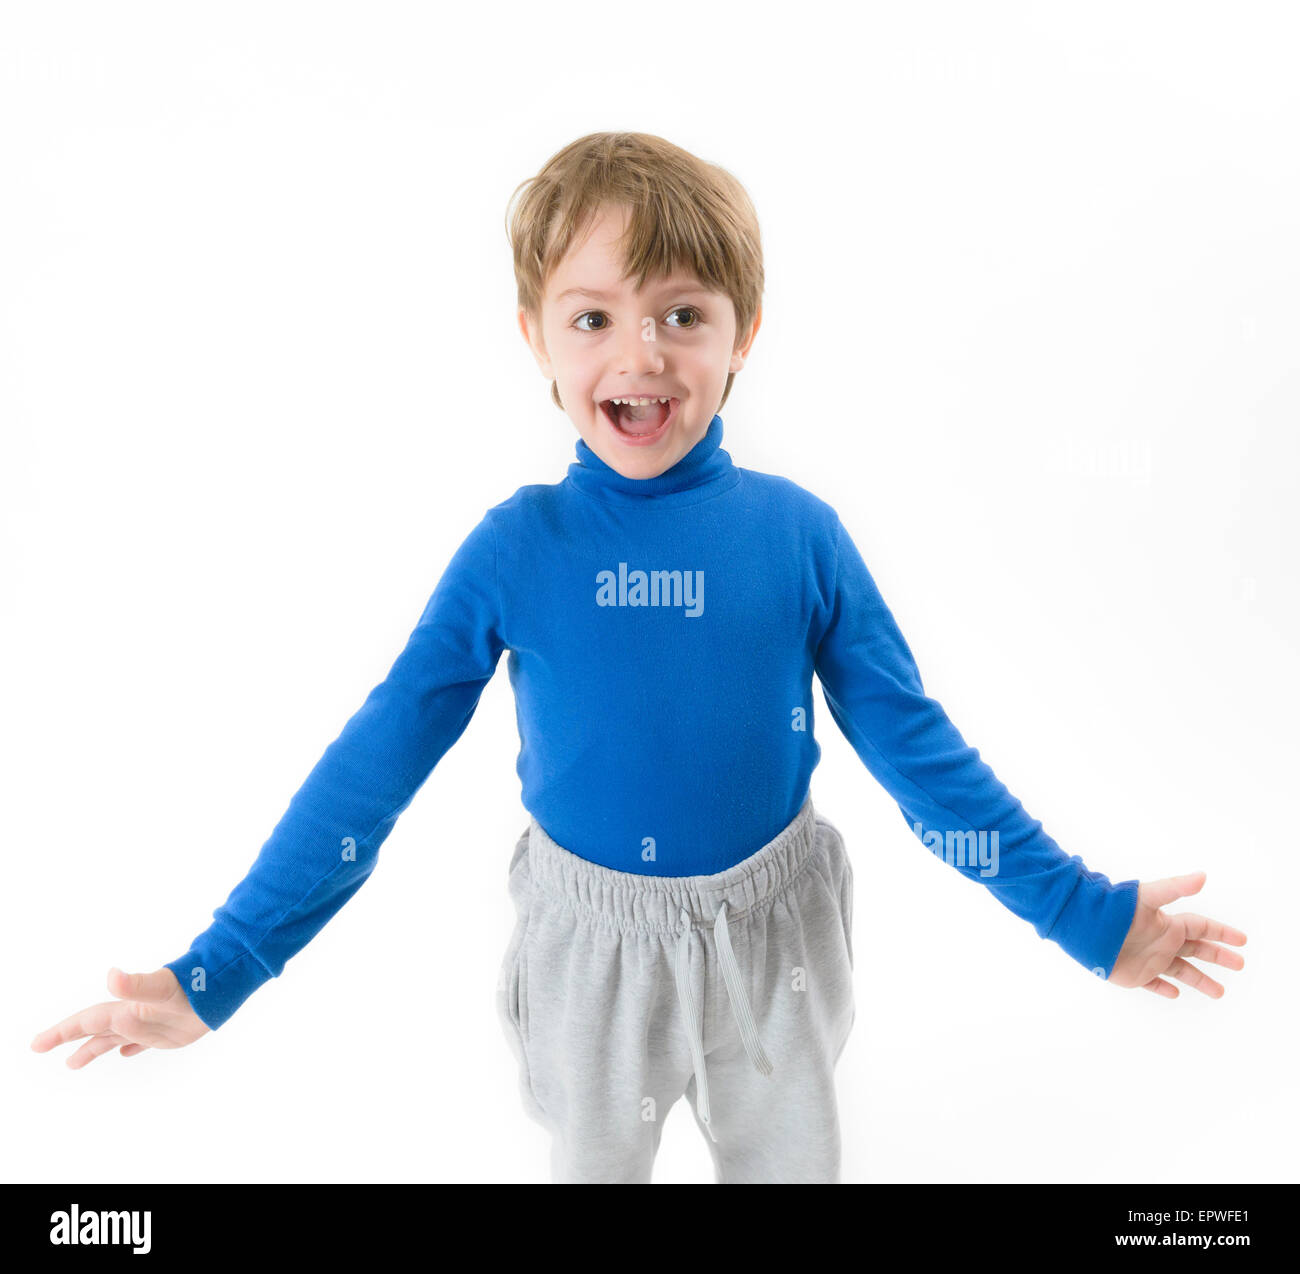 Funny Boy Shouting with open arms isolated on white Stock Photo